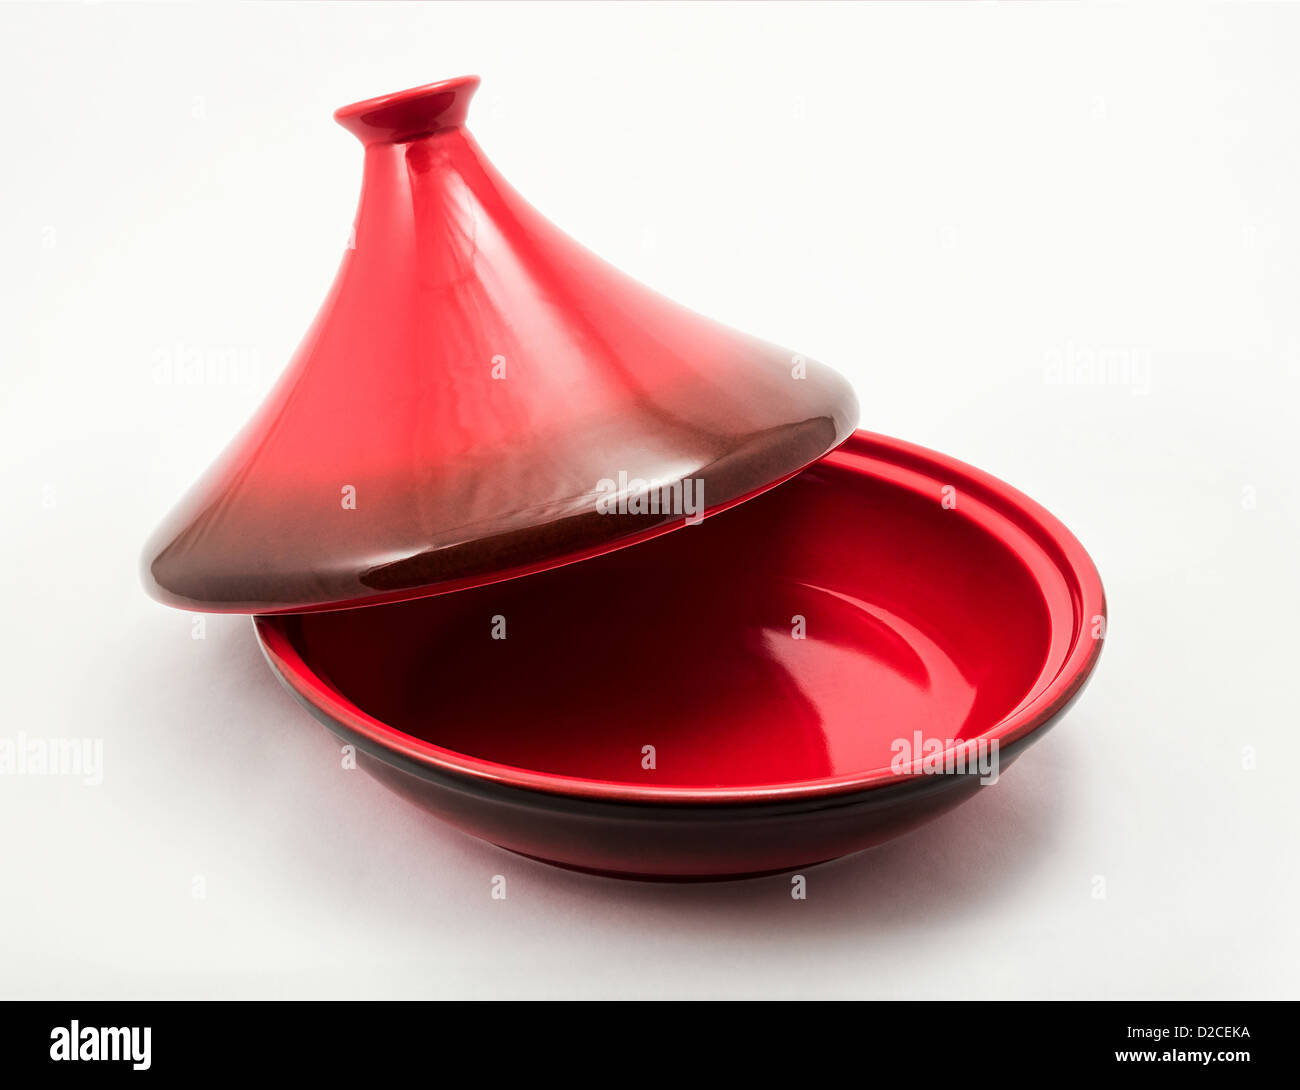 Tagine (Tajine) a type of cookware from Morocco Stock Photo